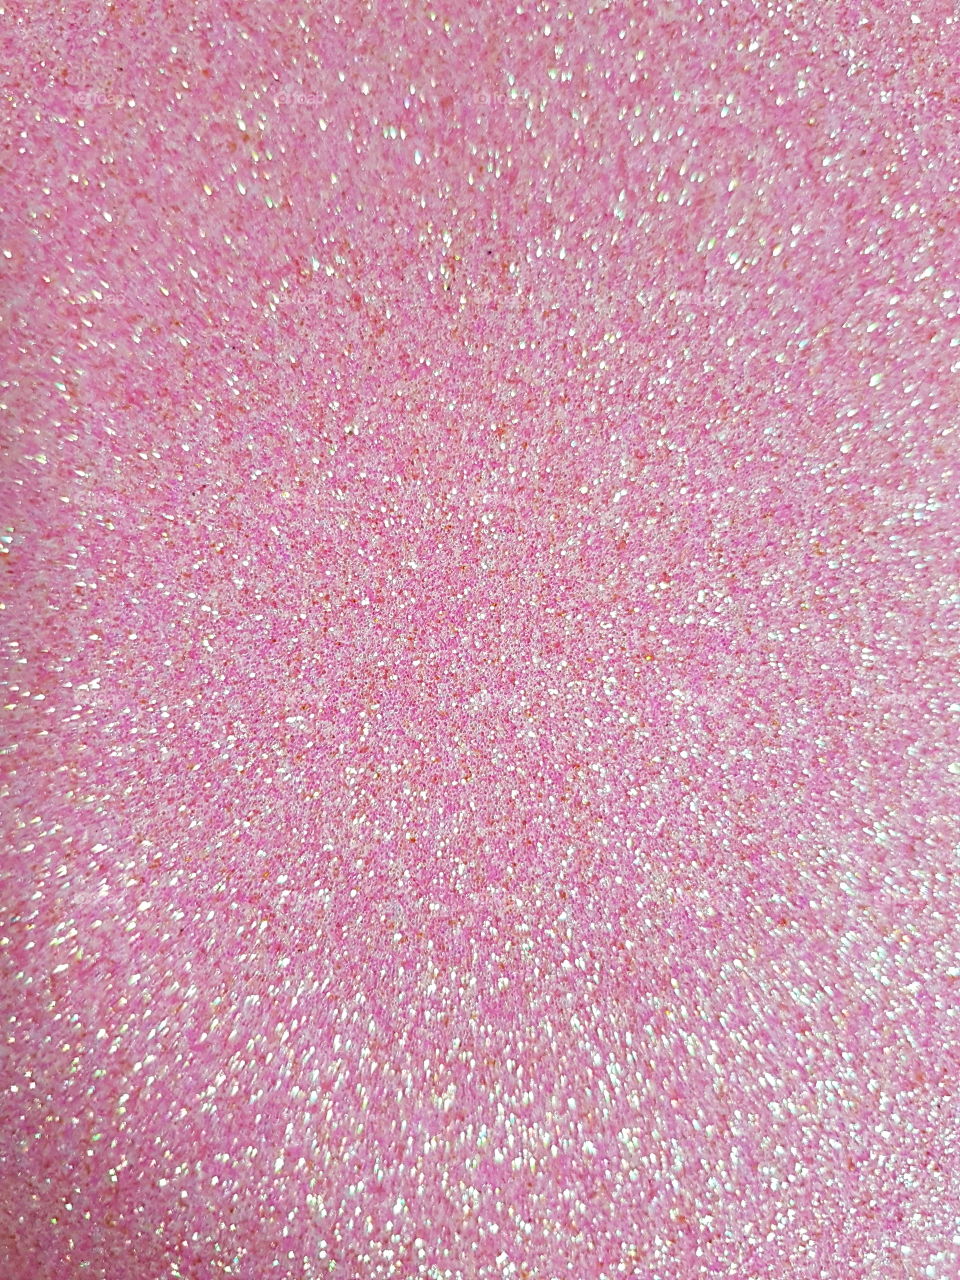 Backgrounds of pink glitter